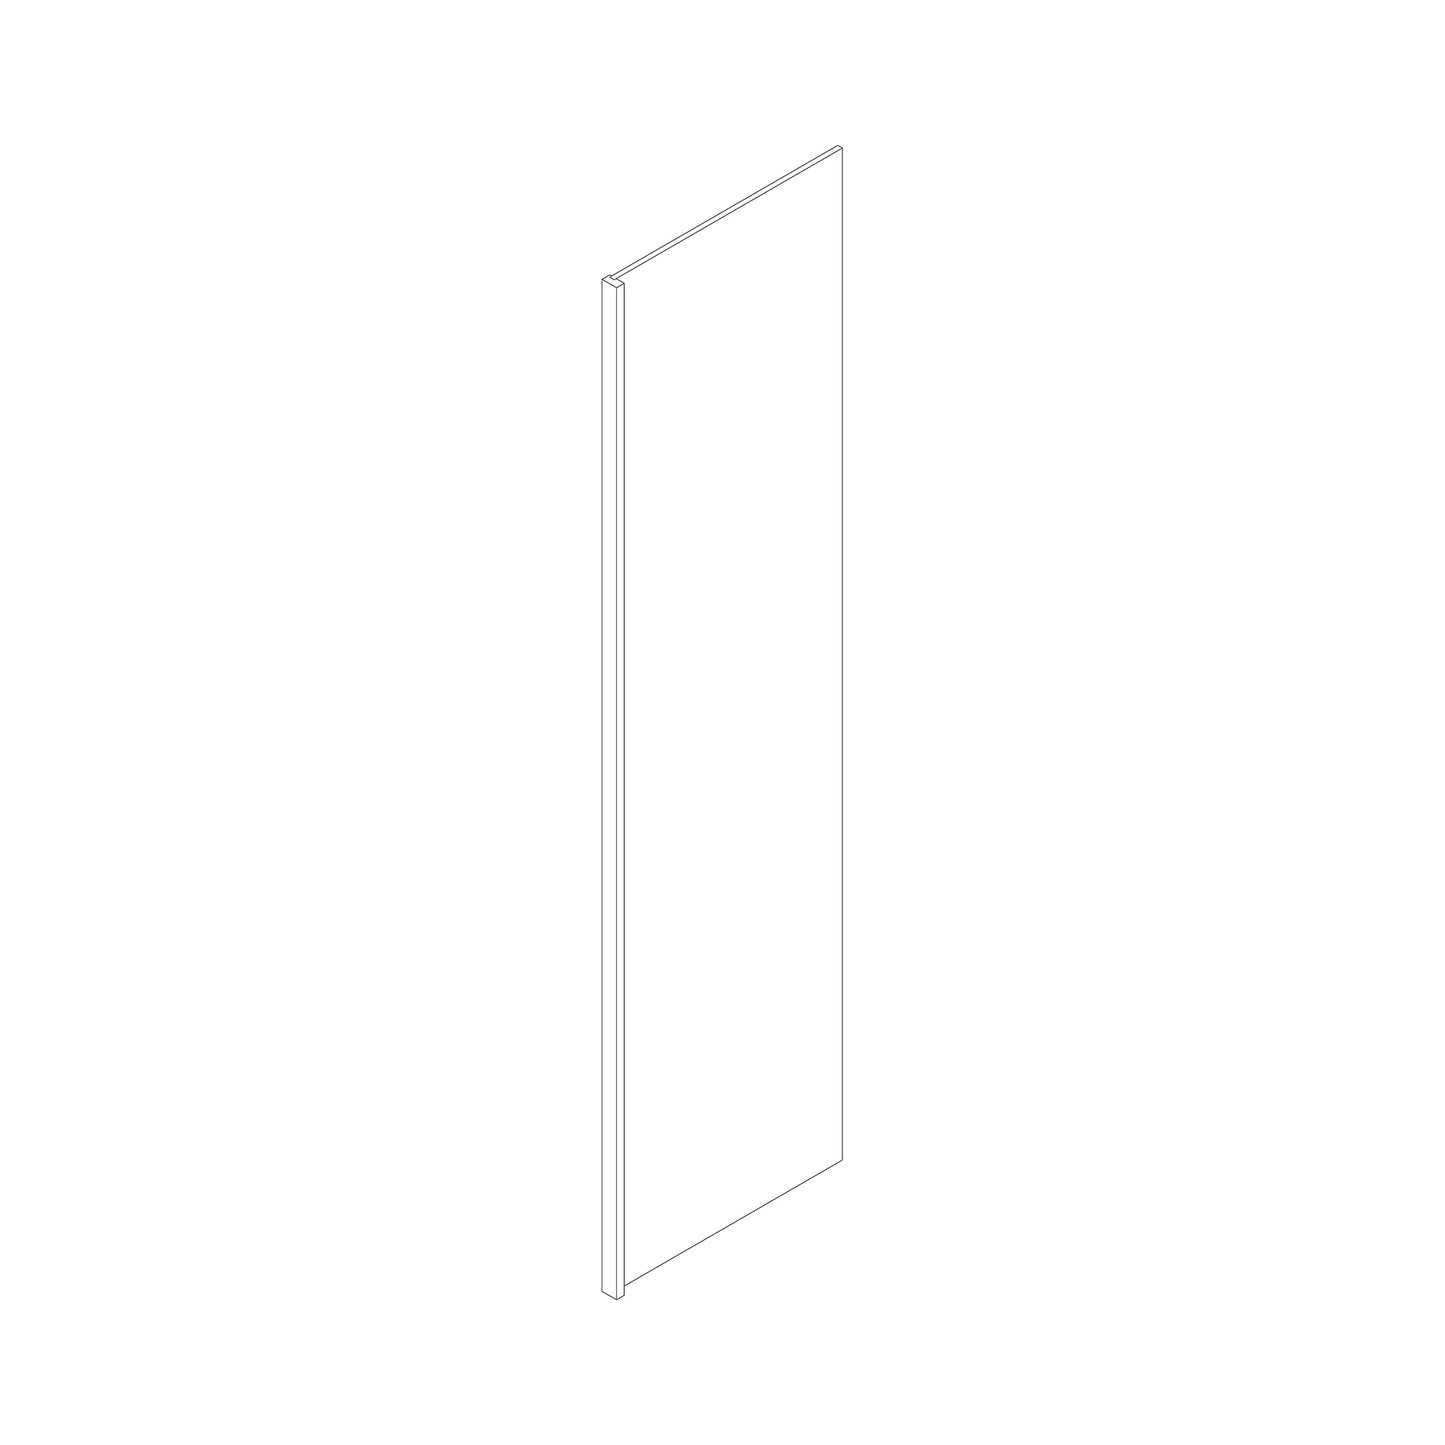 24"D x 96"H x 1.5"W Refrigerator End Panel w/ 1.5"W Front Molding